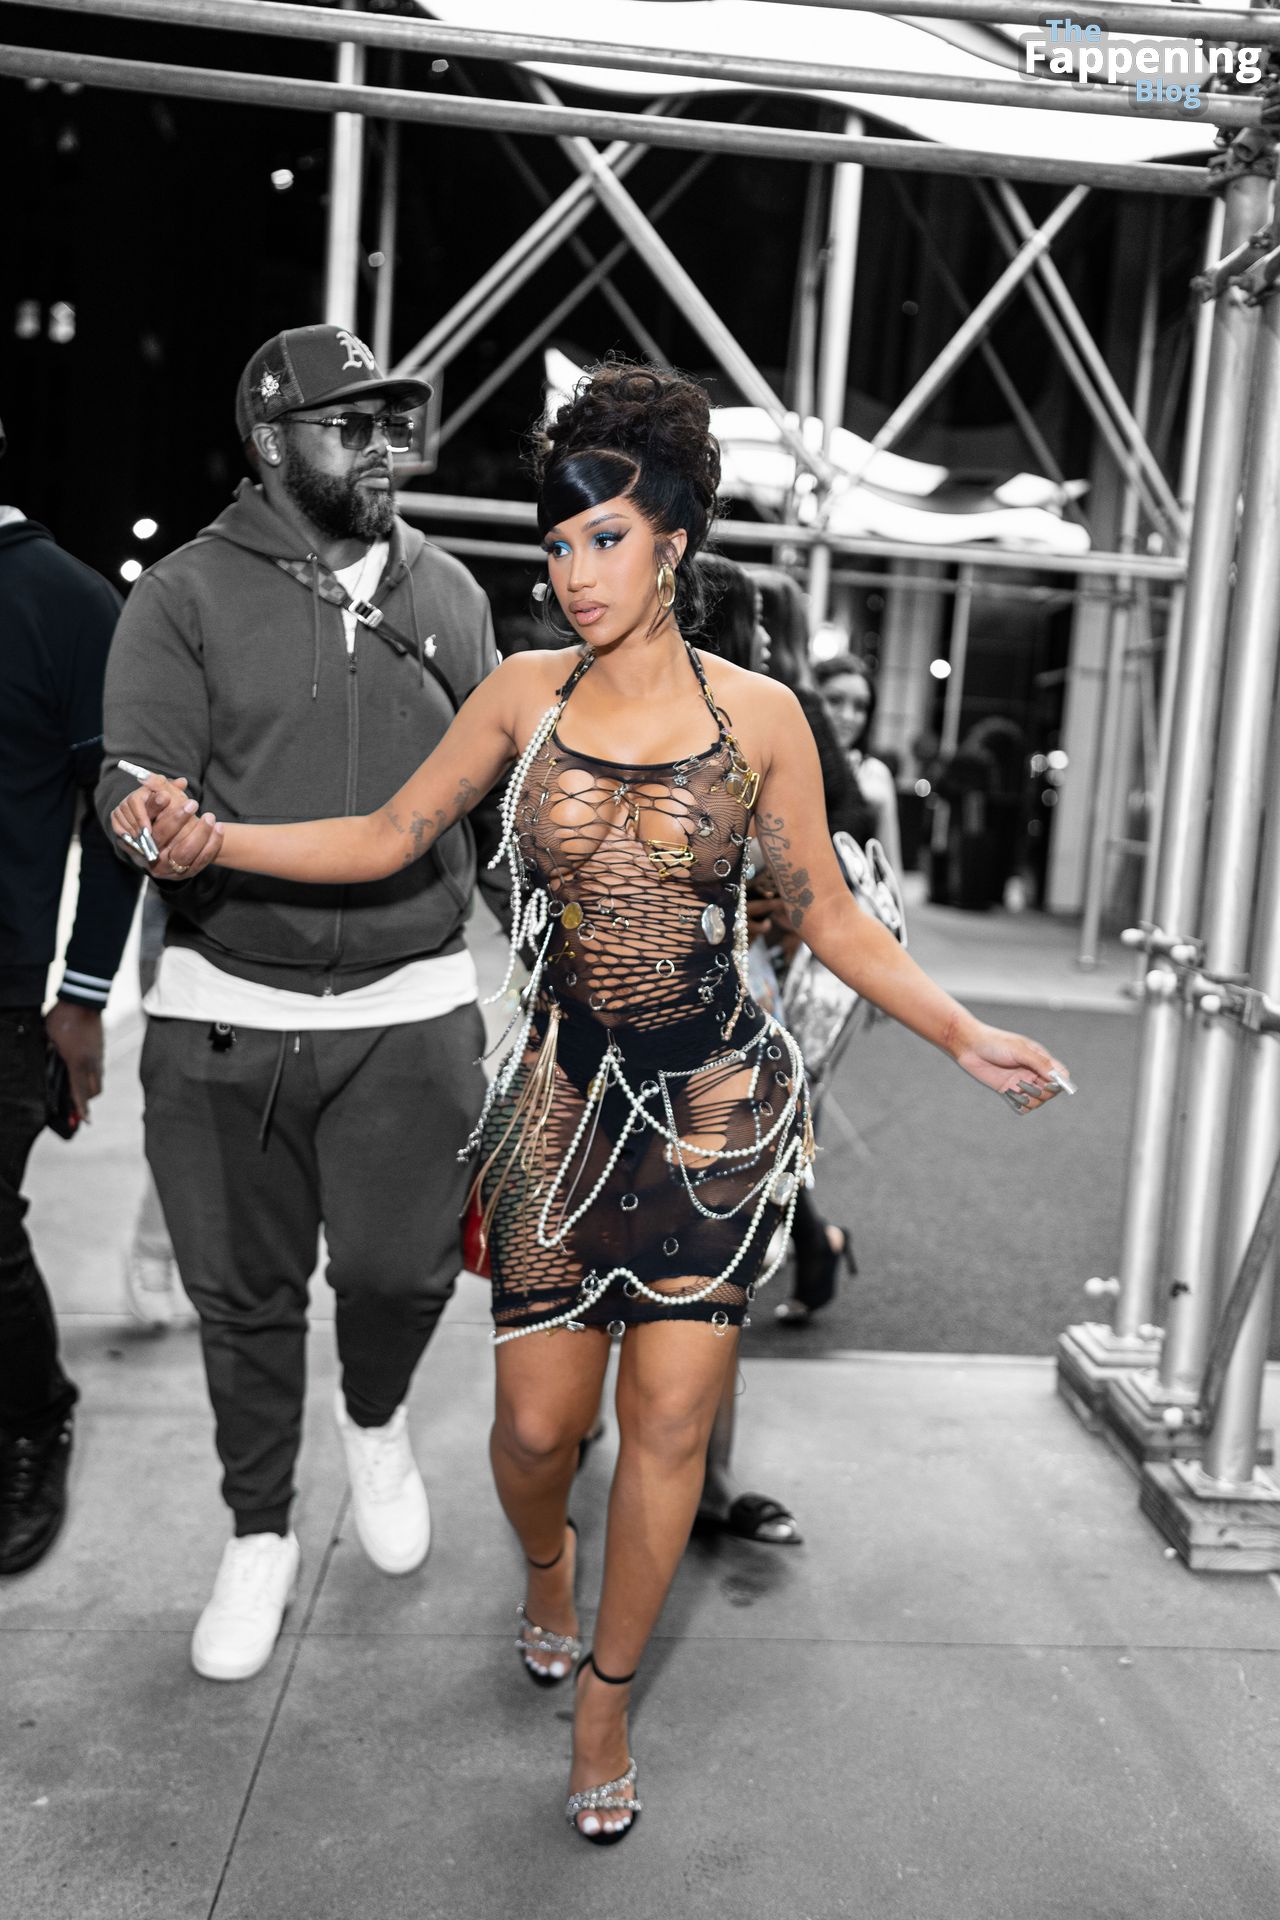 Cardi B Displays Her Curves In A Hot Outfit In New York 13 Photos